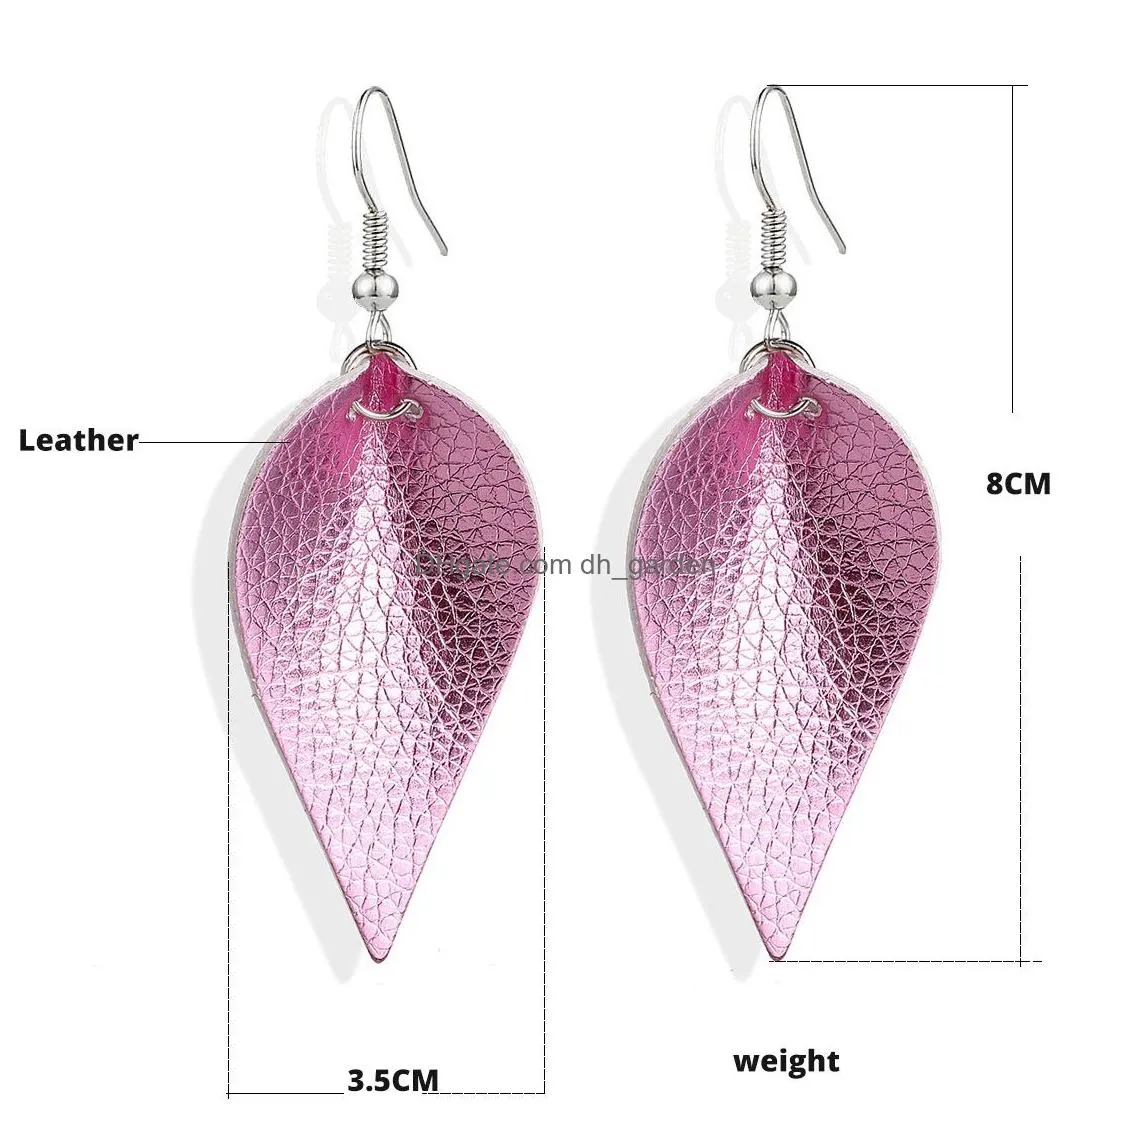 New Cutting Leaf Feather Earrings PU Leather Sequins Looking Various Multi Colors Bohemia Water Drop Dangle Earrings Fashion Jewelry